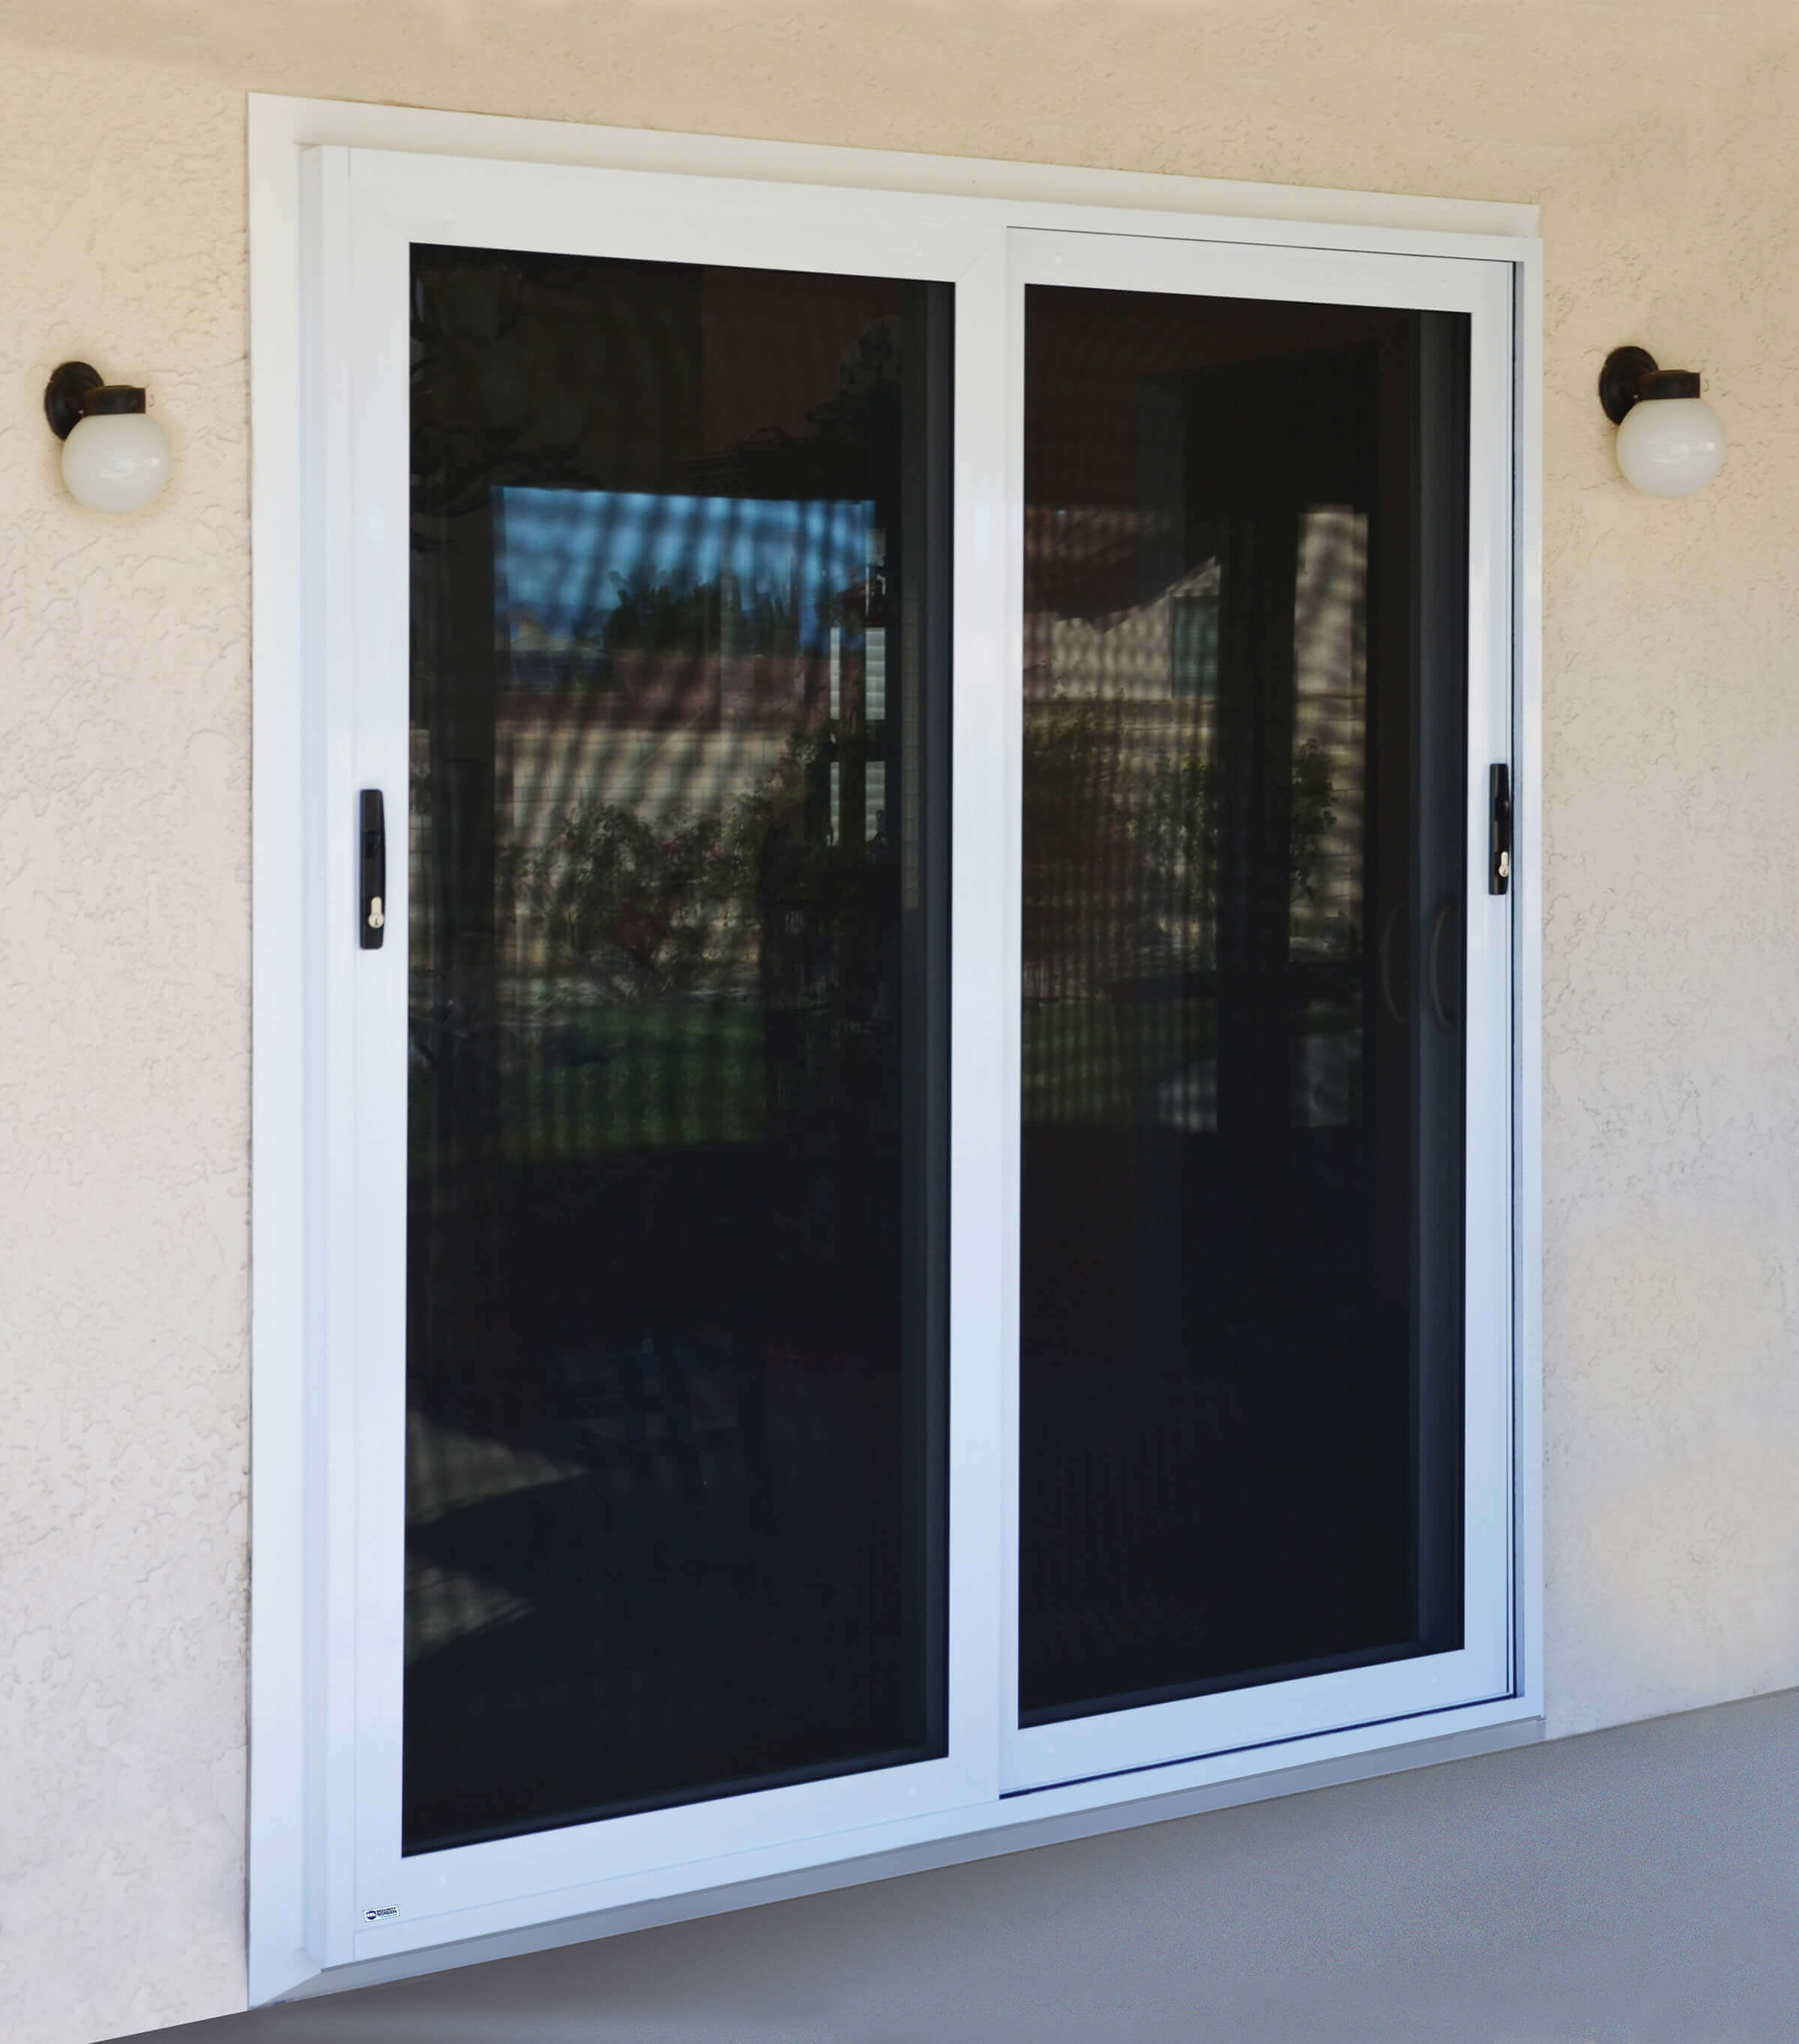 Sliding security screen doors with white trim on home